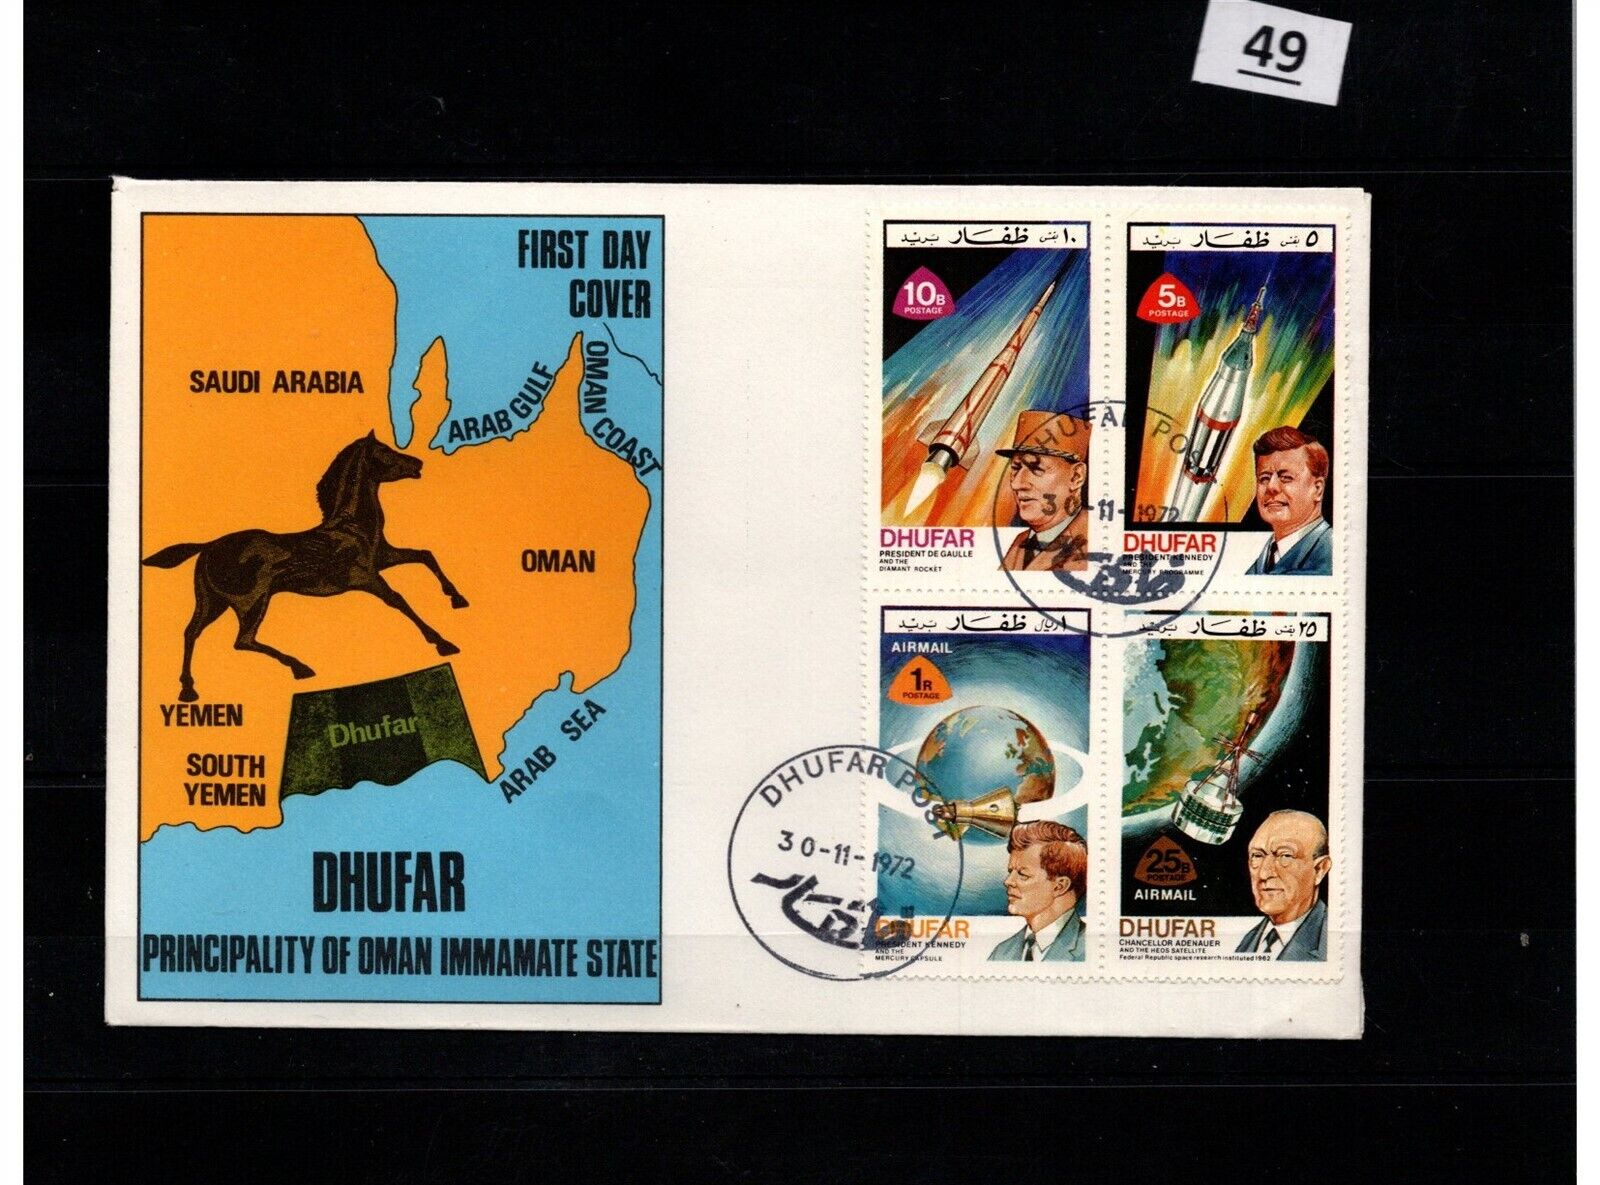 DHUFAR - FDC SPACE Max 82% OFF Today's only KENNEDY MAPS 19 SPACESHIPS